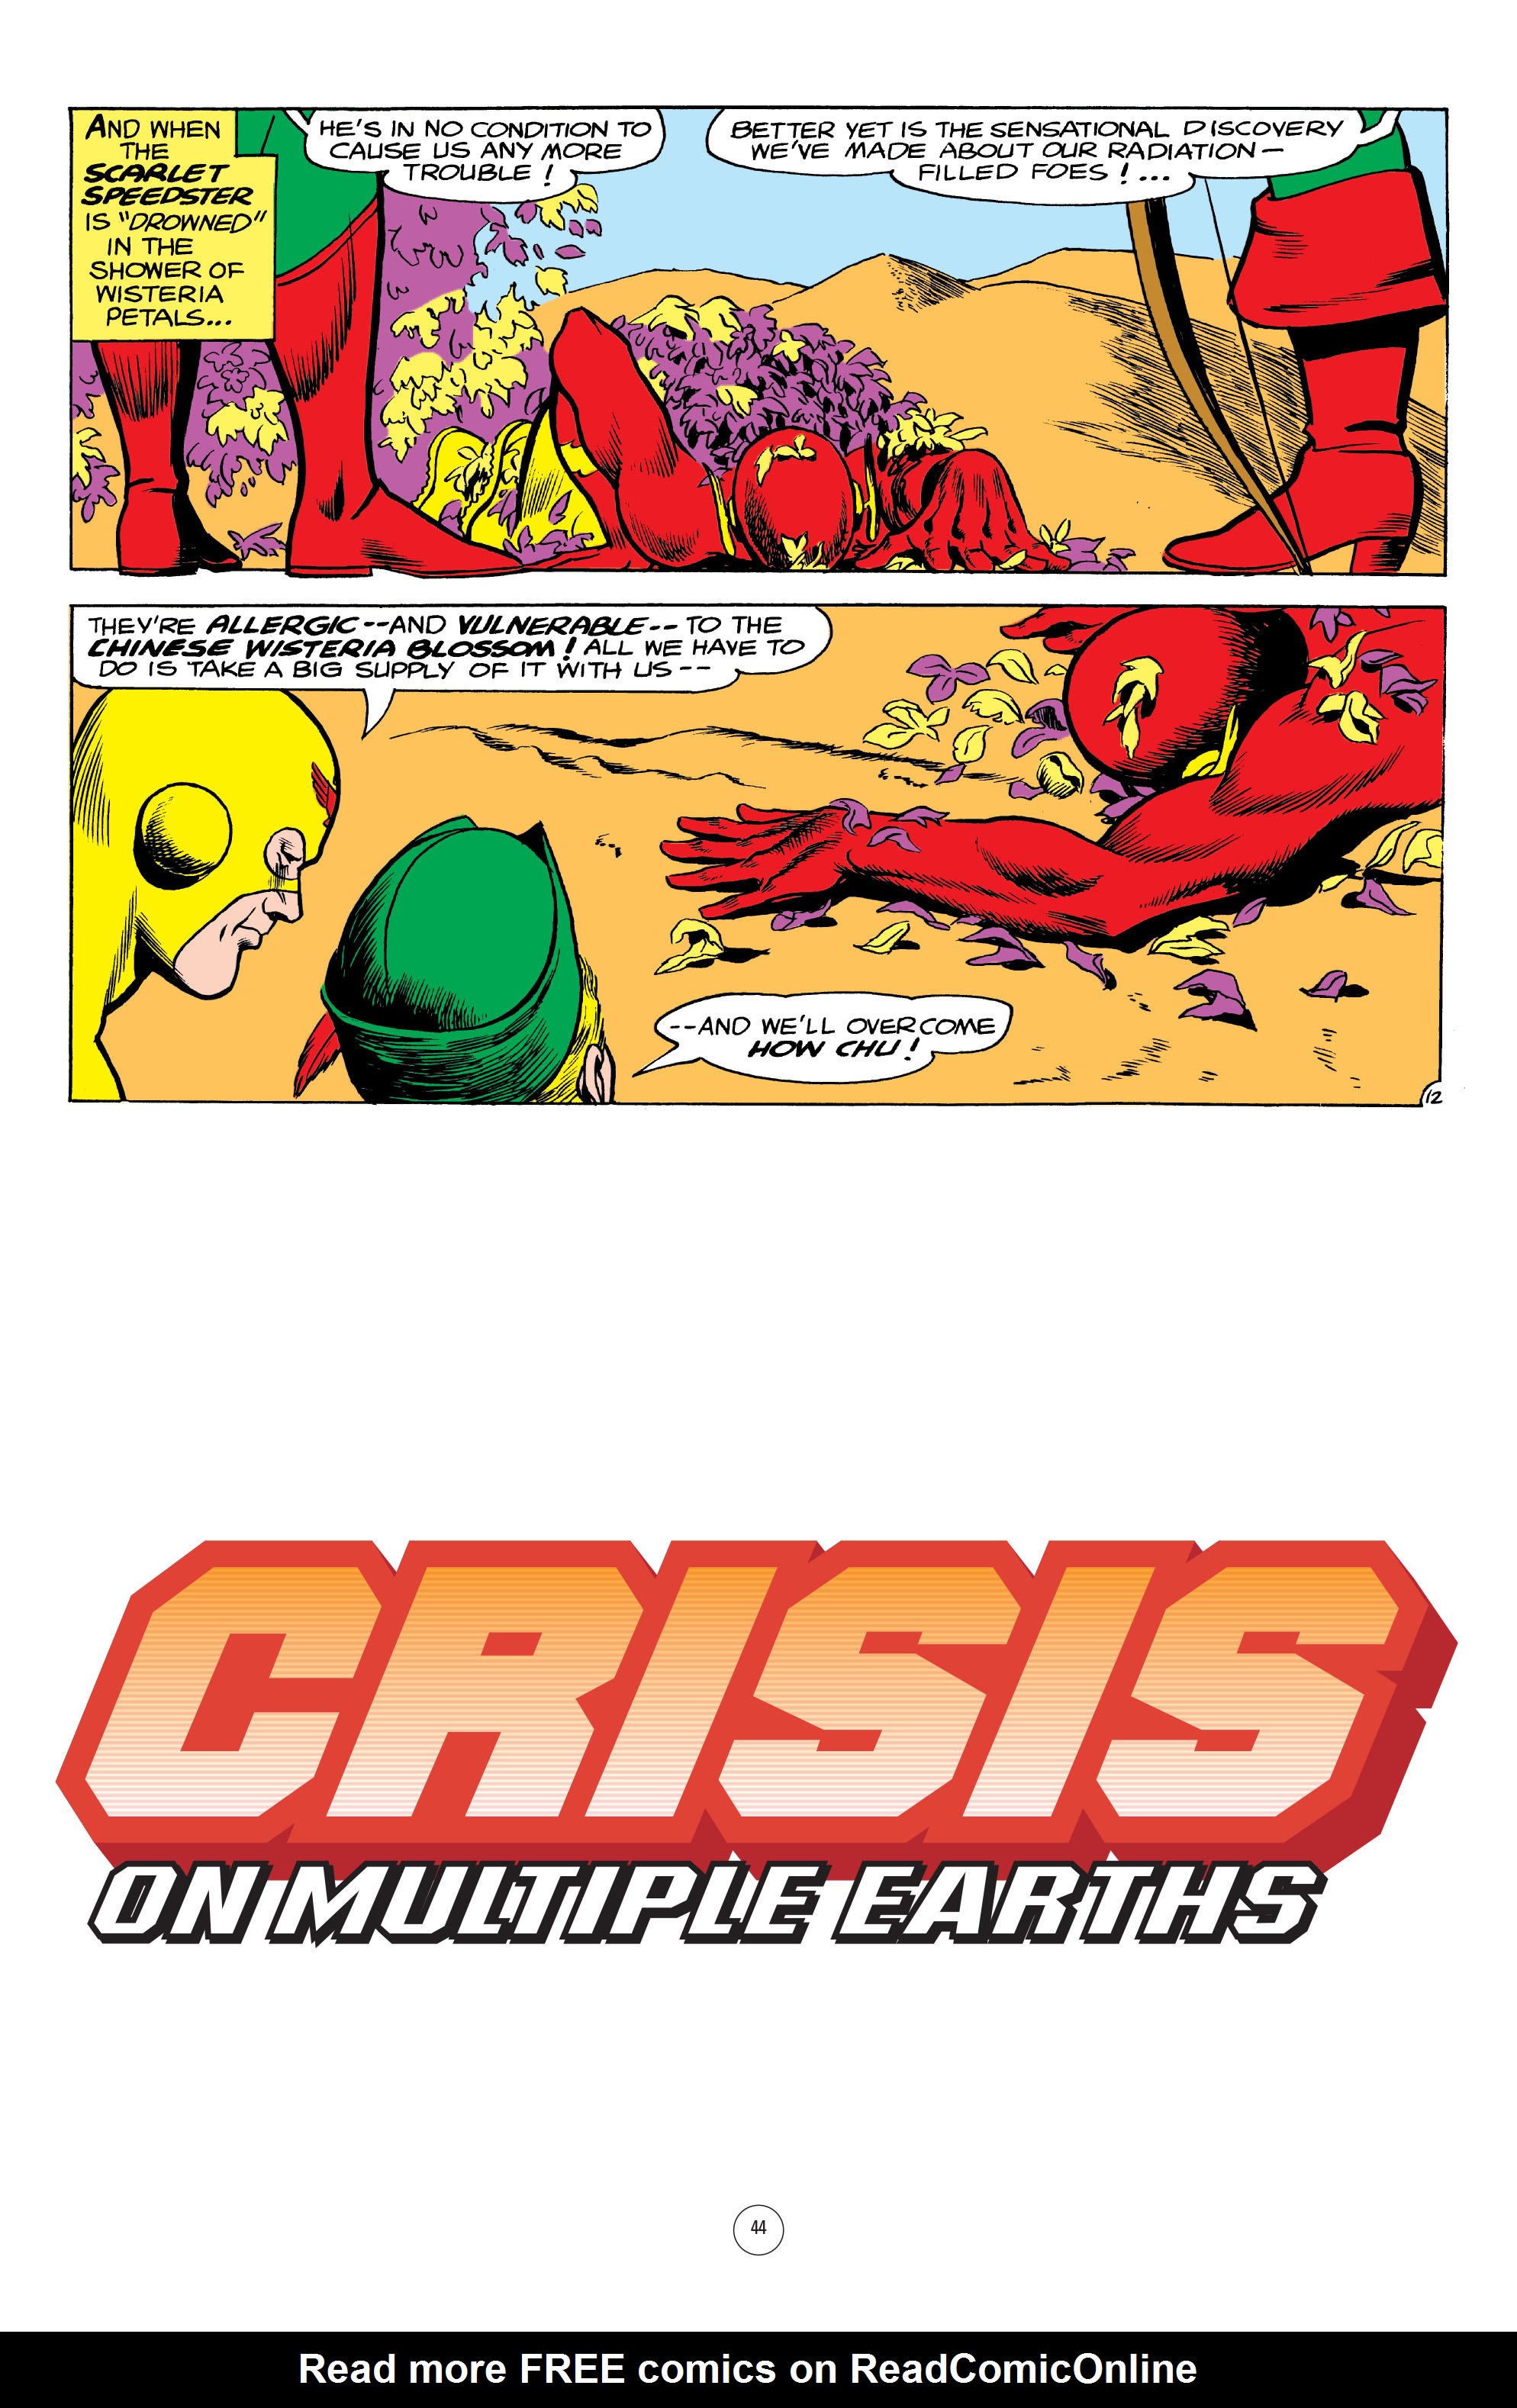 Read online Crisis on Multiple Earths comic -  Issue # TPB 2 - 44